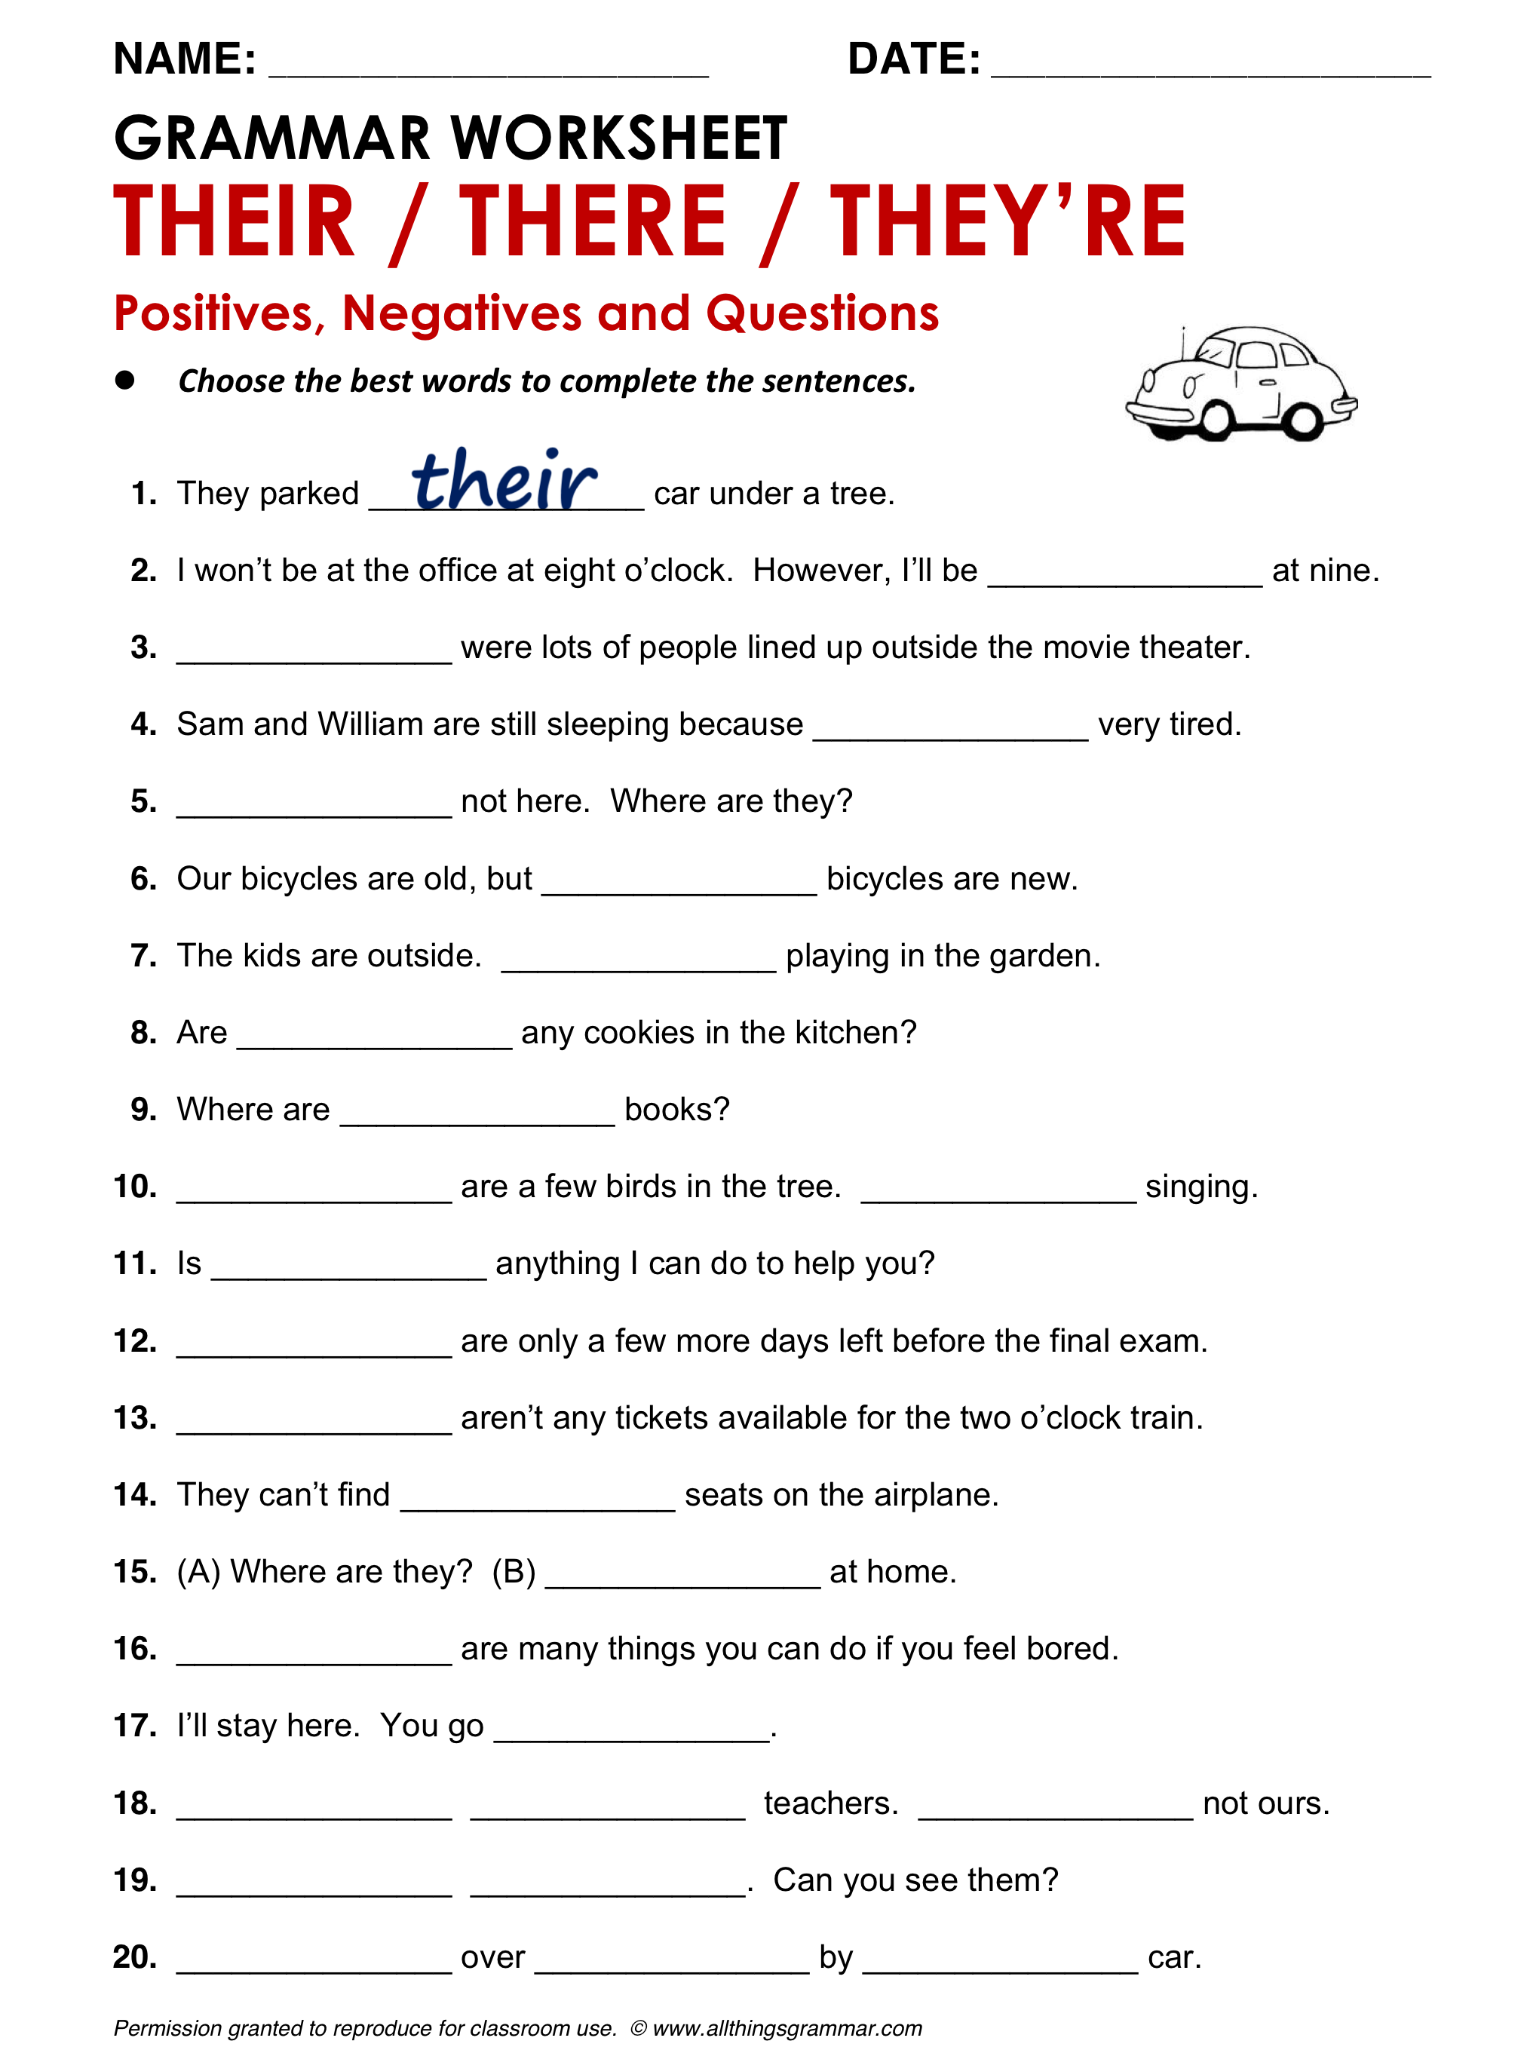 Free English Worksheets For Middle School Students